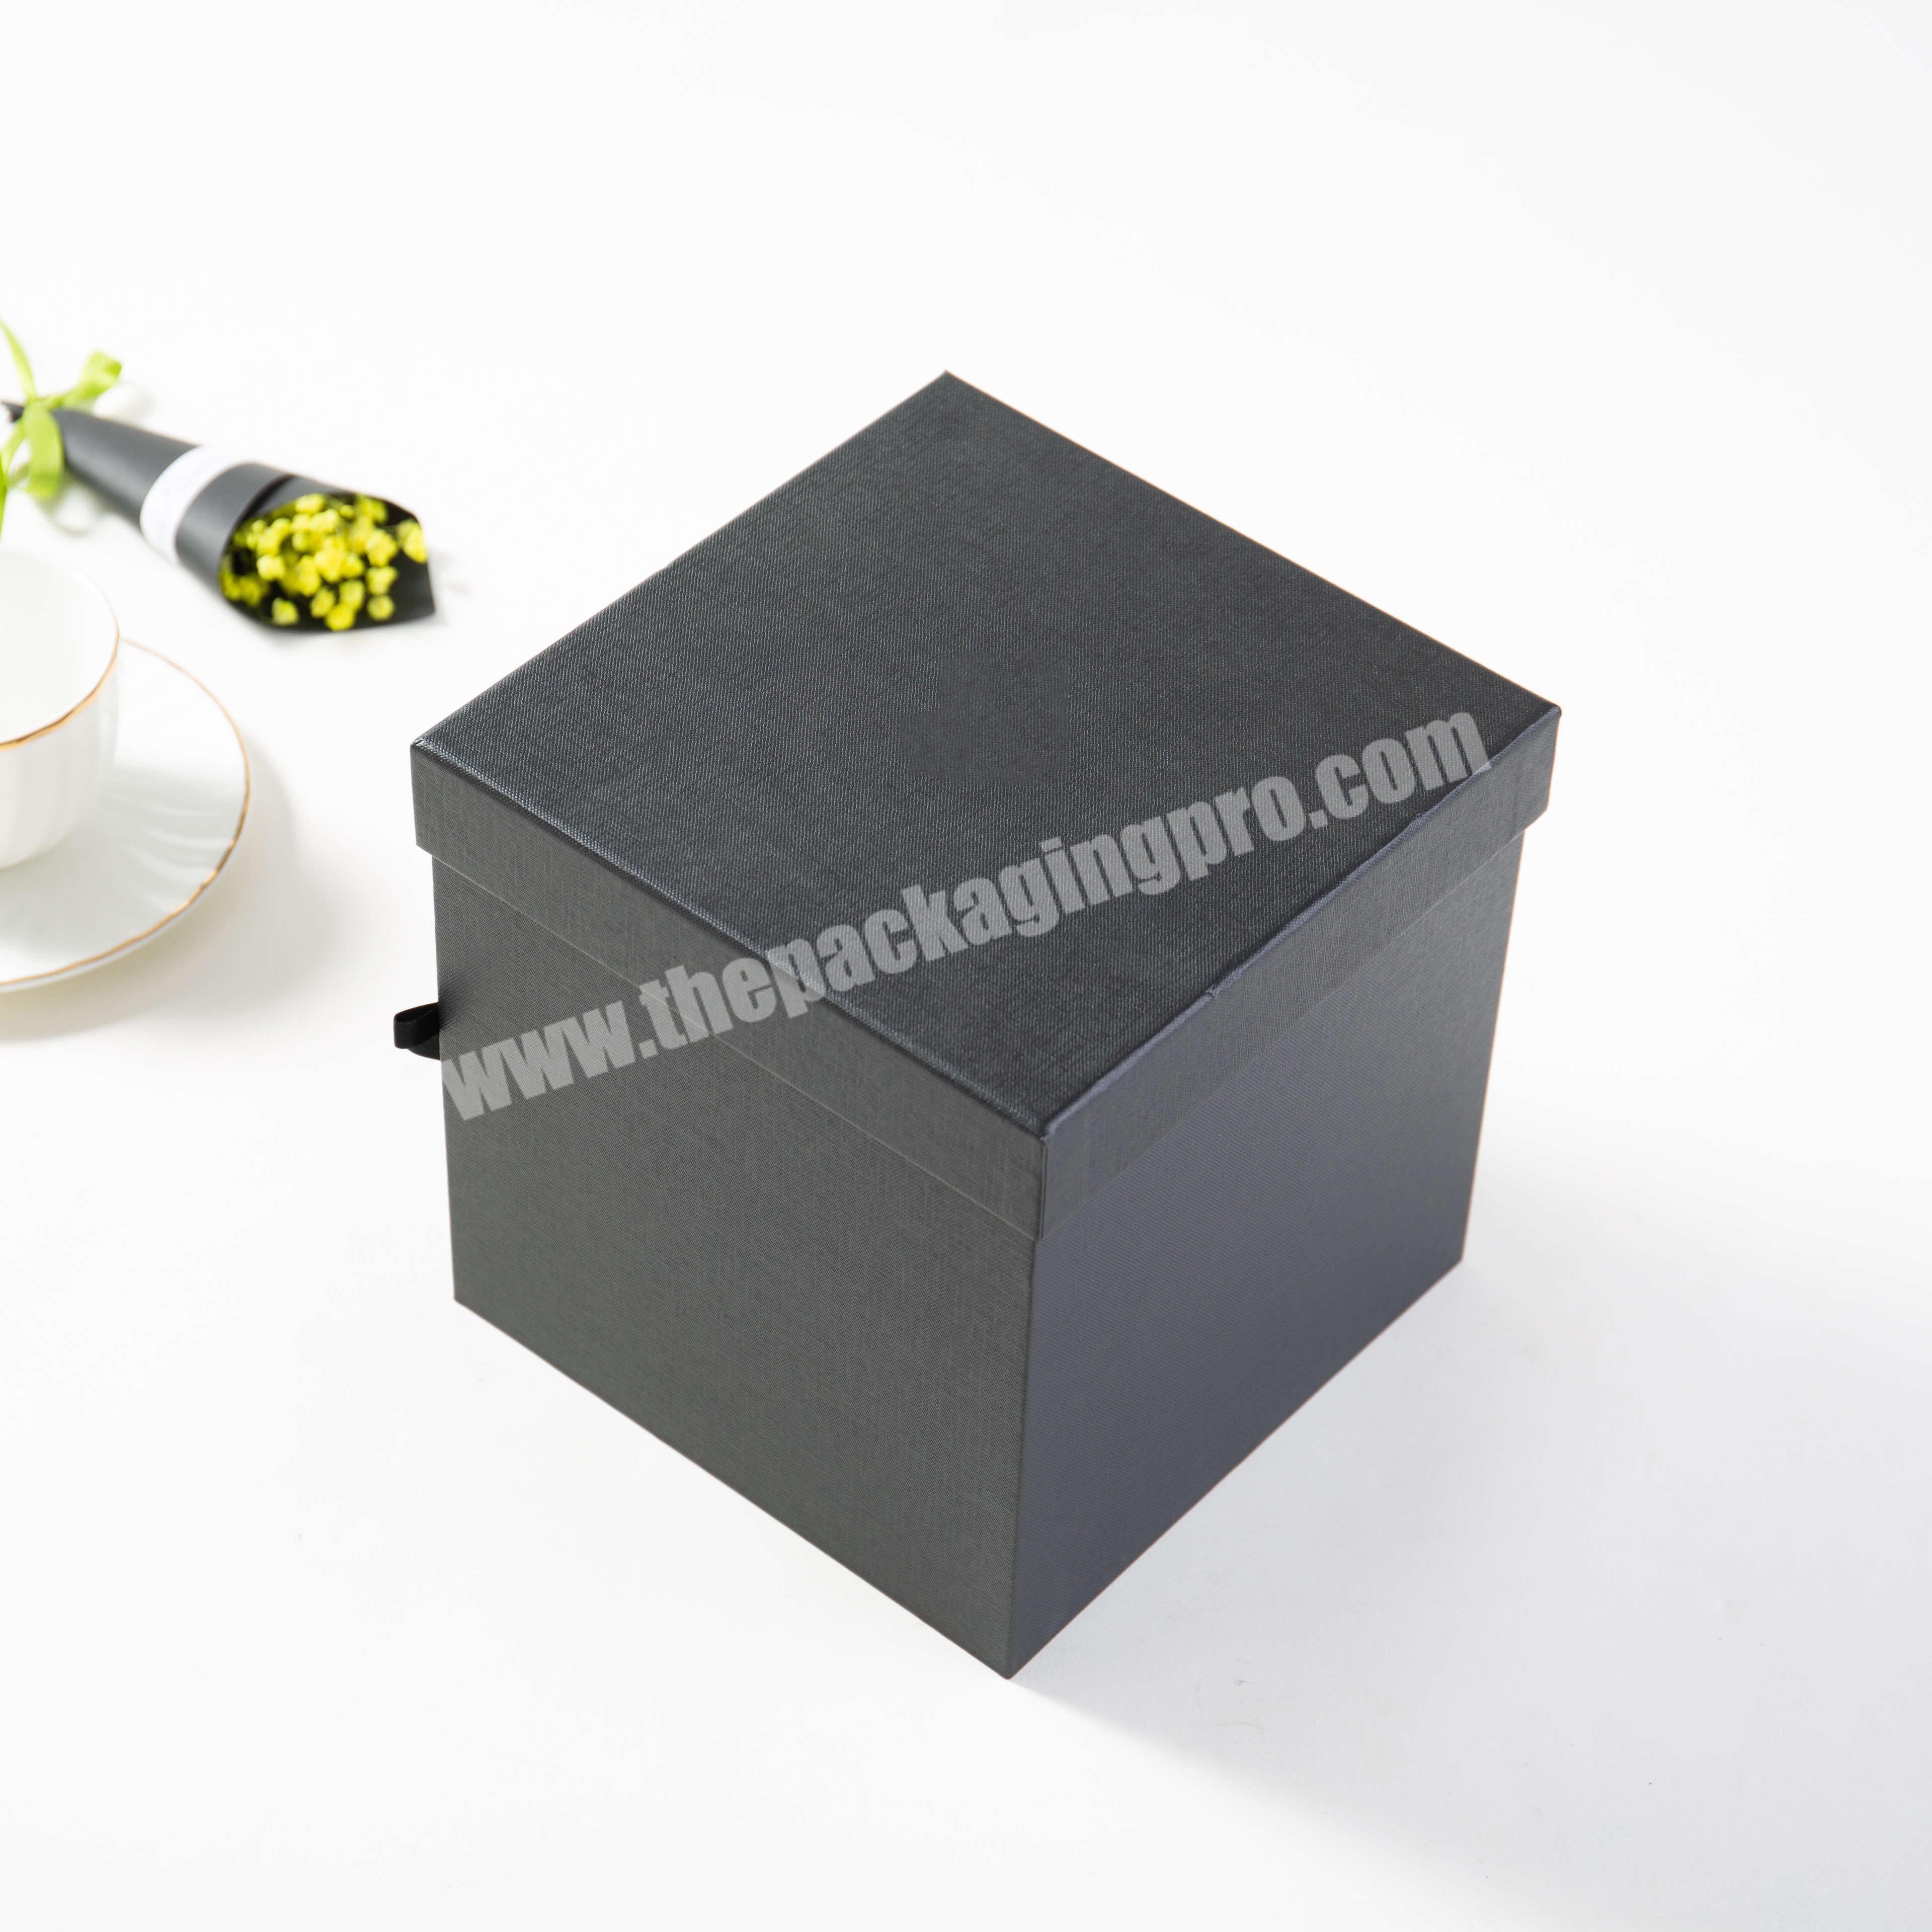 for wholesales New arrival OEM Customized Designs Customers Logo COSMETIC BOX